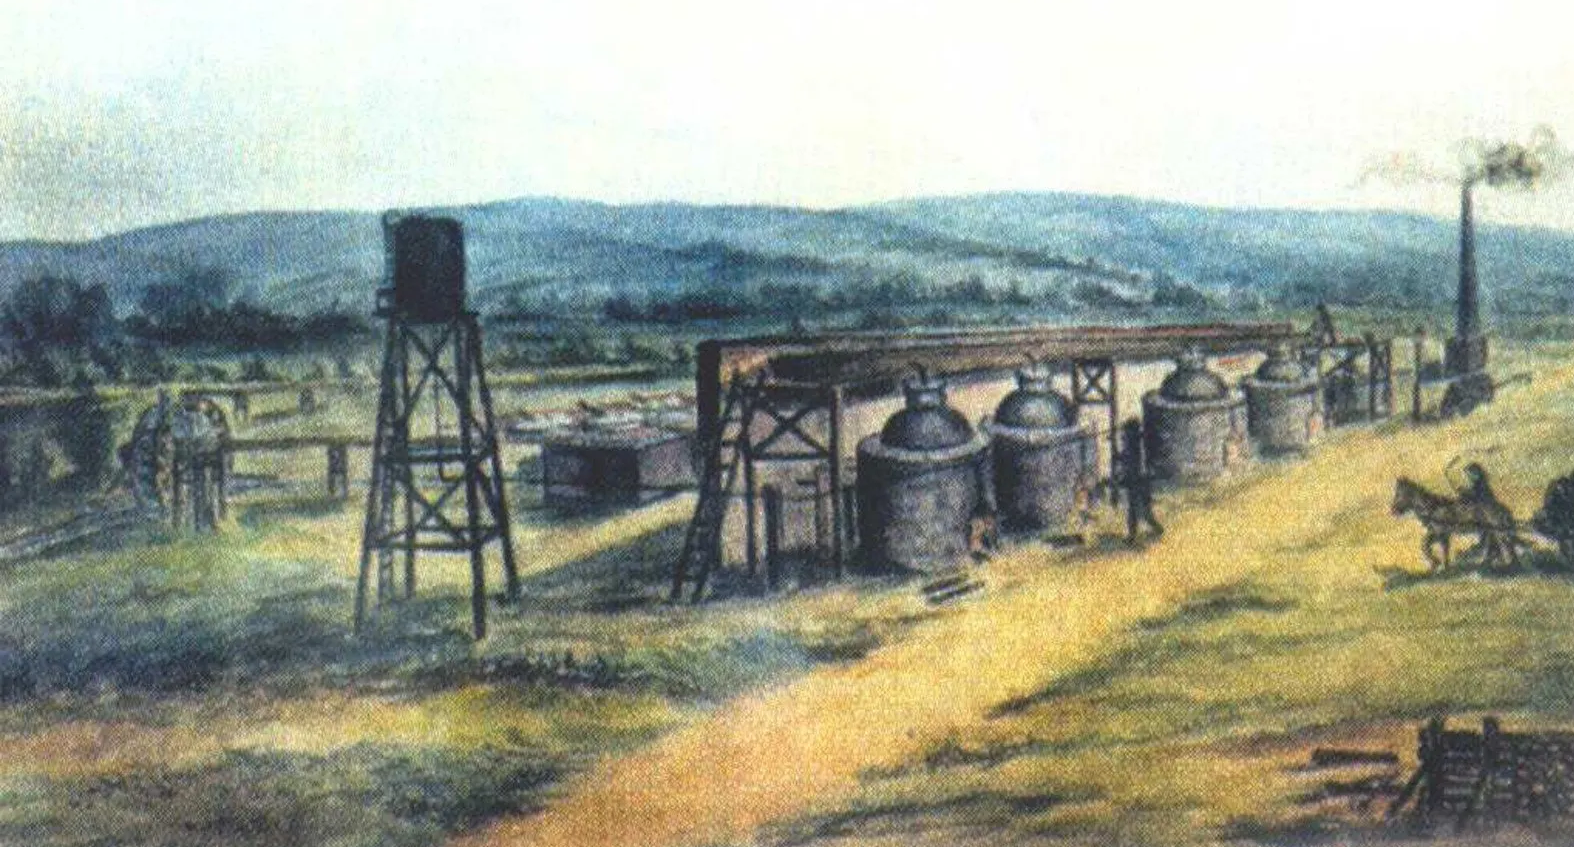 
World's first oil refinery: the city of Ploiesti